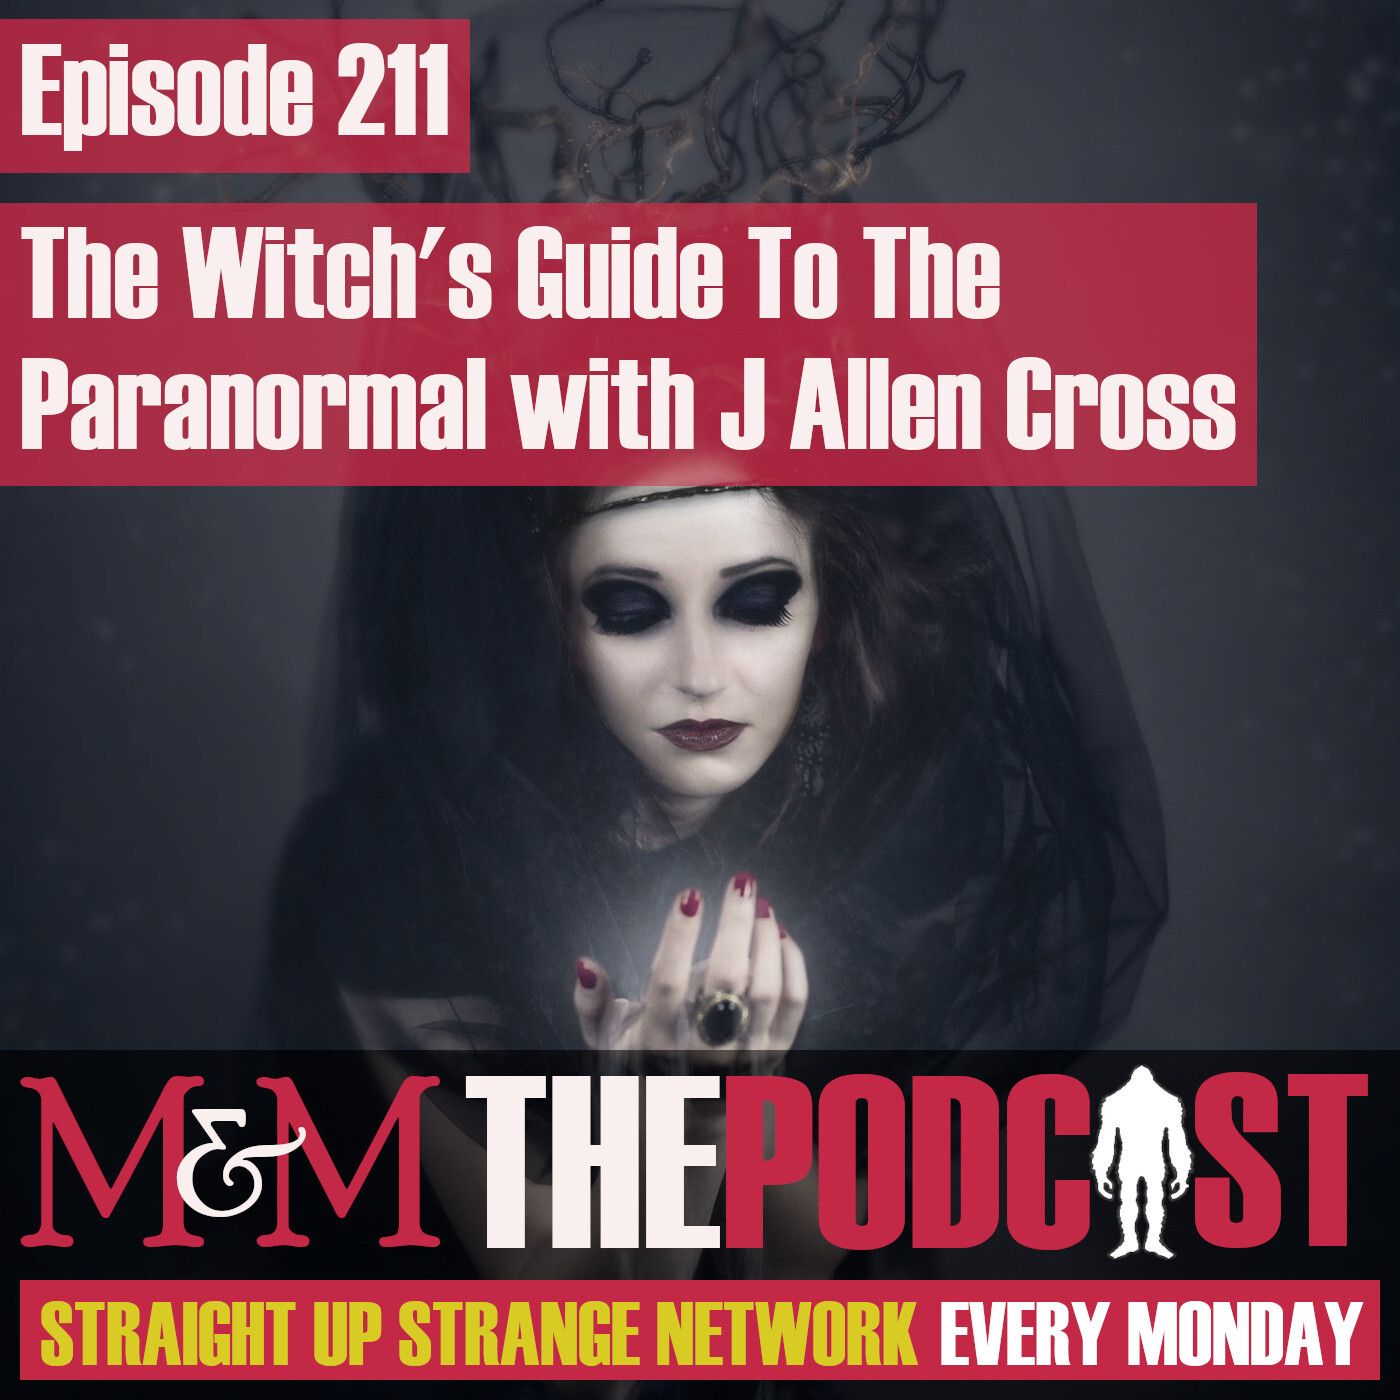 Mysteries and Monsters: Episode 211 The Witches Guide To The Paranormal with J. Allen Cross